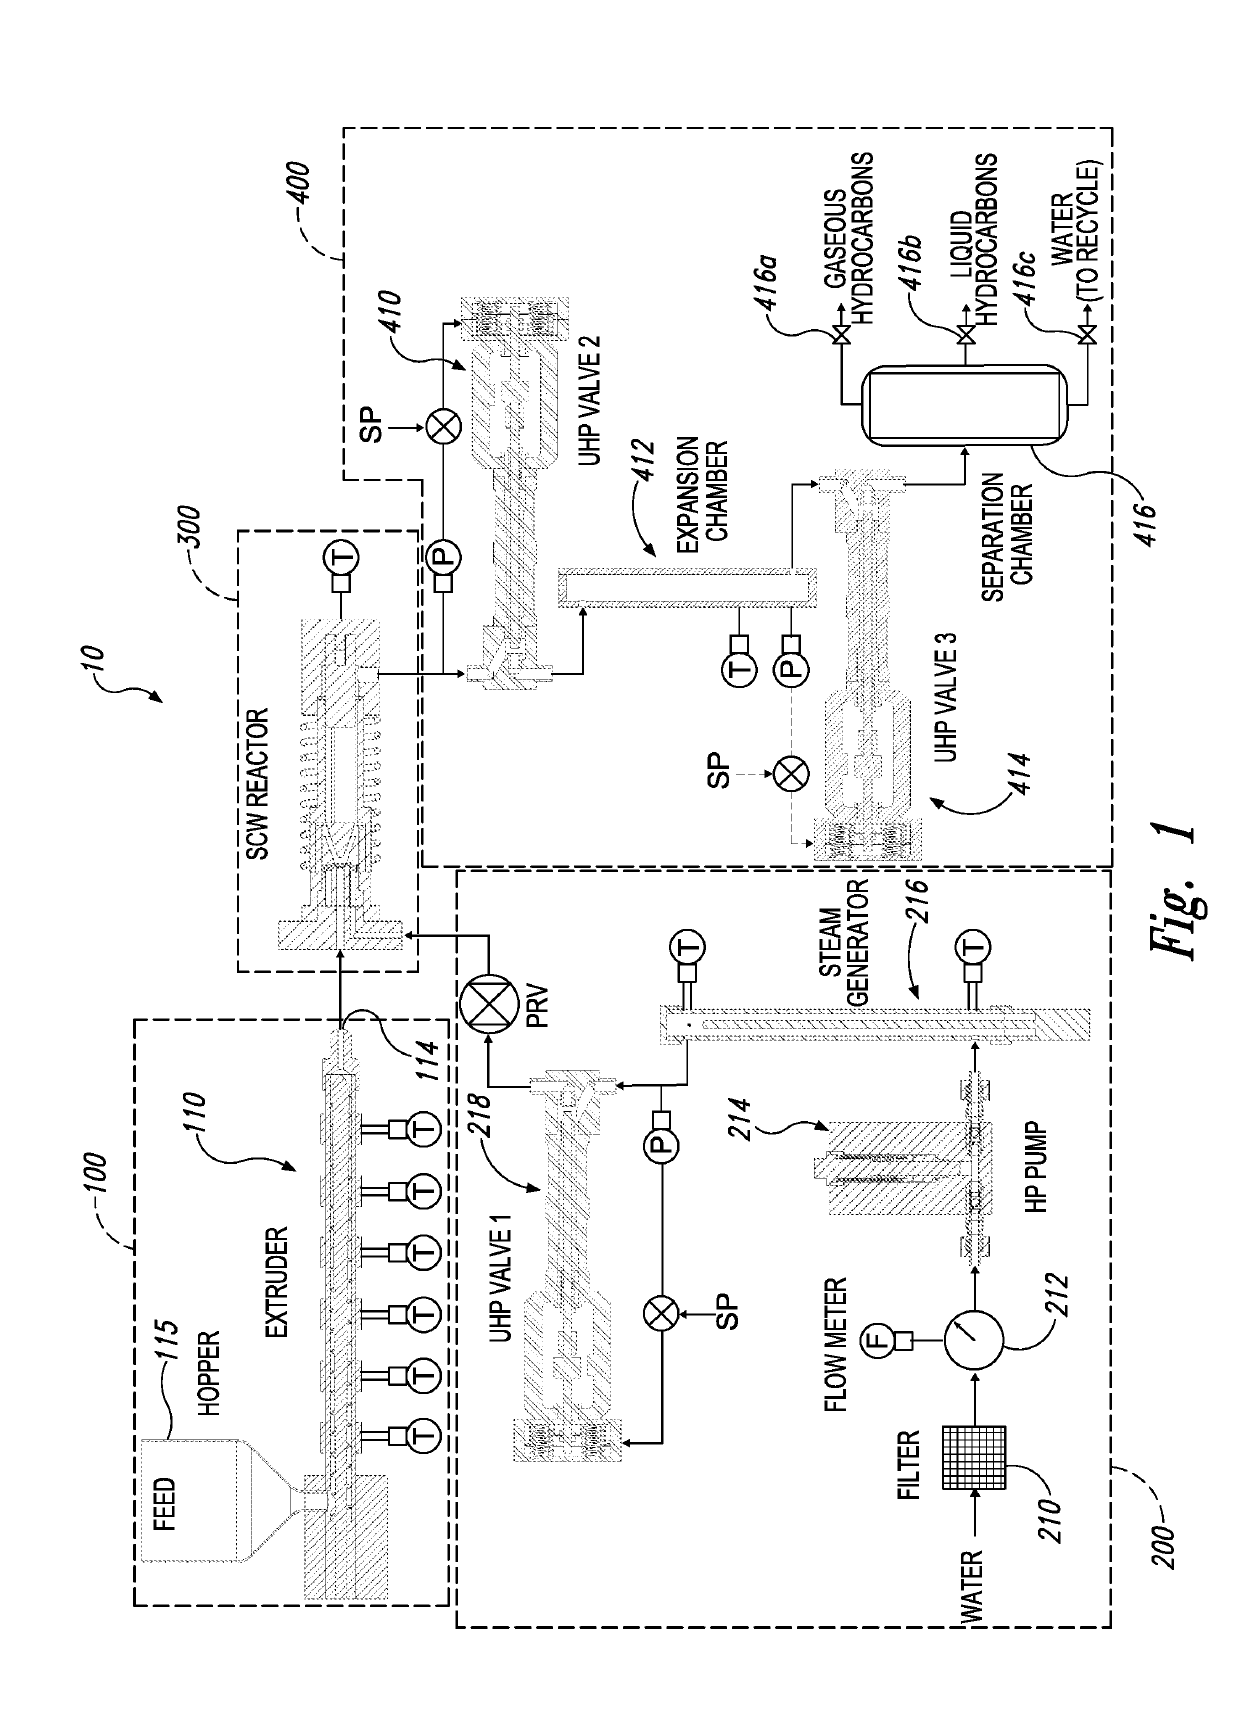 Machine and methods for transforming biomass and/or waste plastics via supercritical water reaction